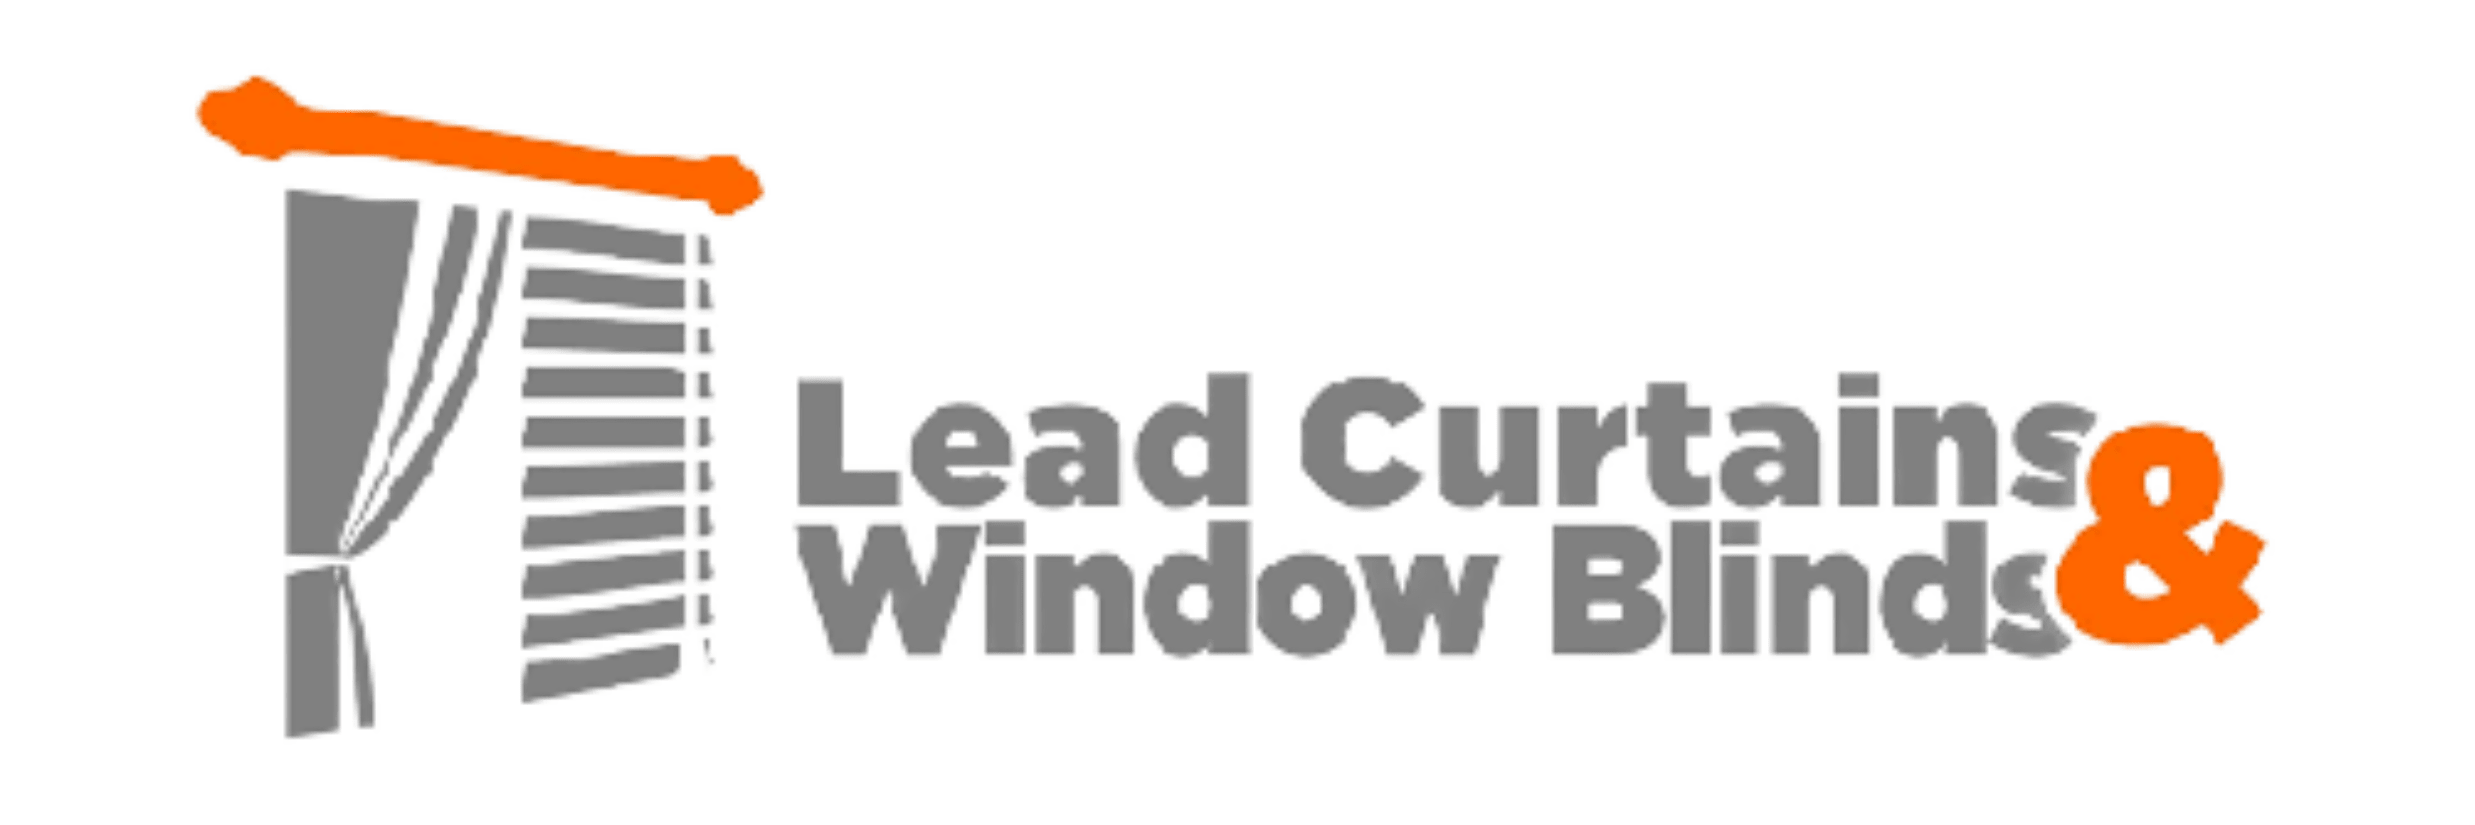 Lead Curtains and Window Blinds